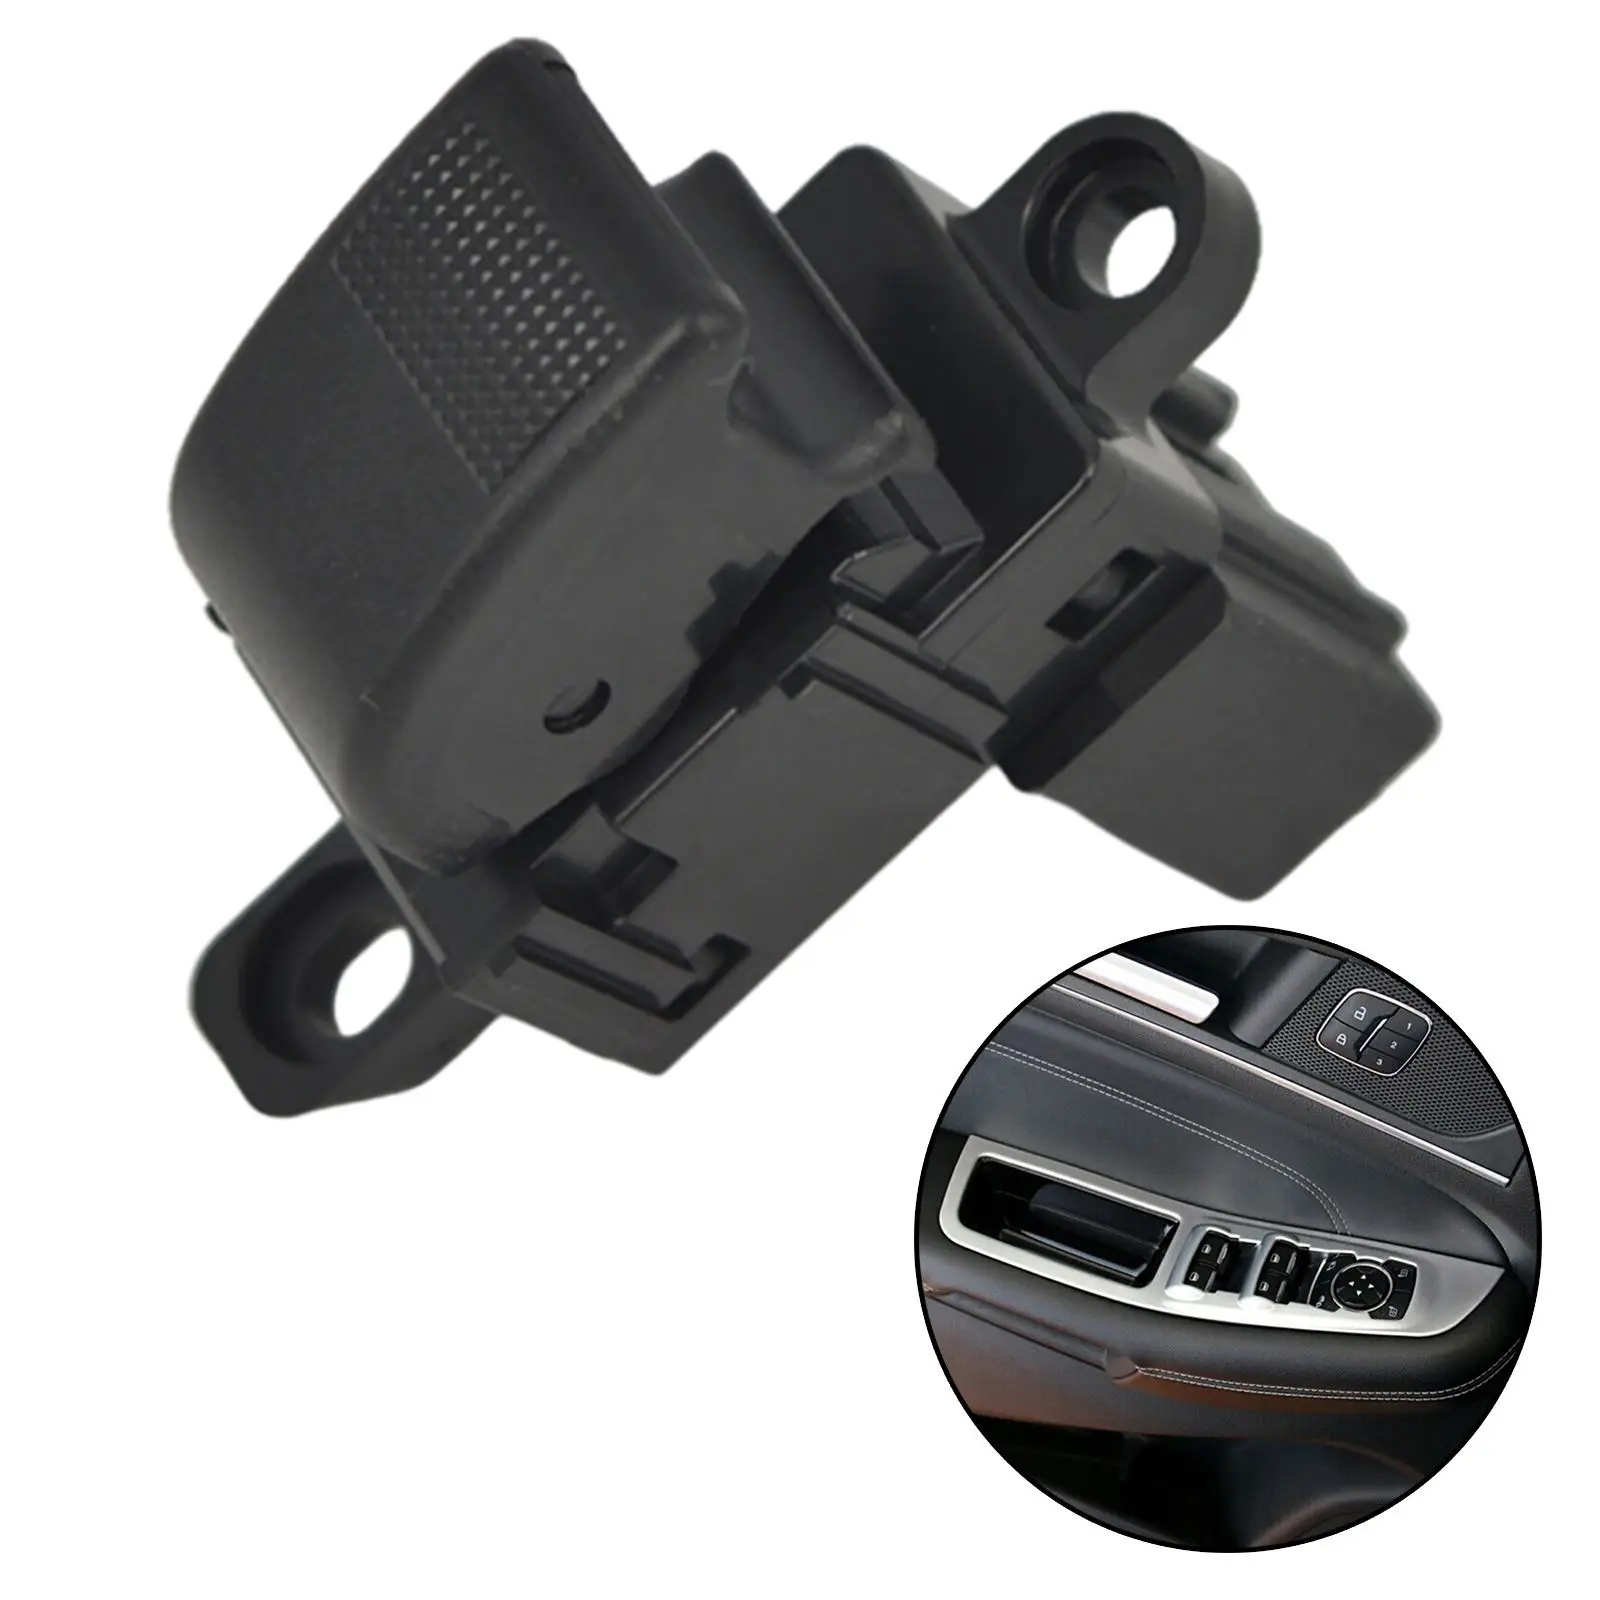 Power Window Control Switch Black Ur56-66-37 Replace Parts for Ford Ranger 2006-2012 Car Accessories Auto Parts